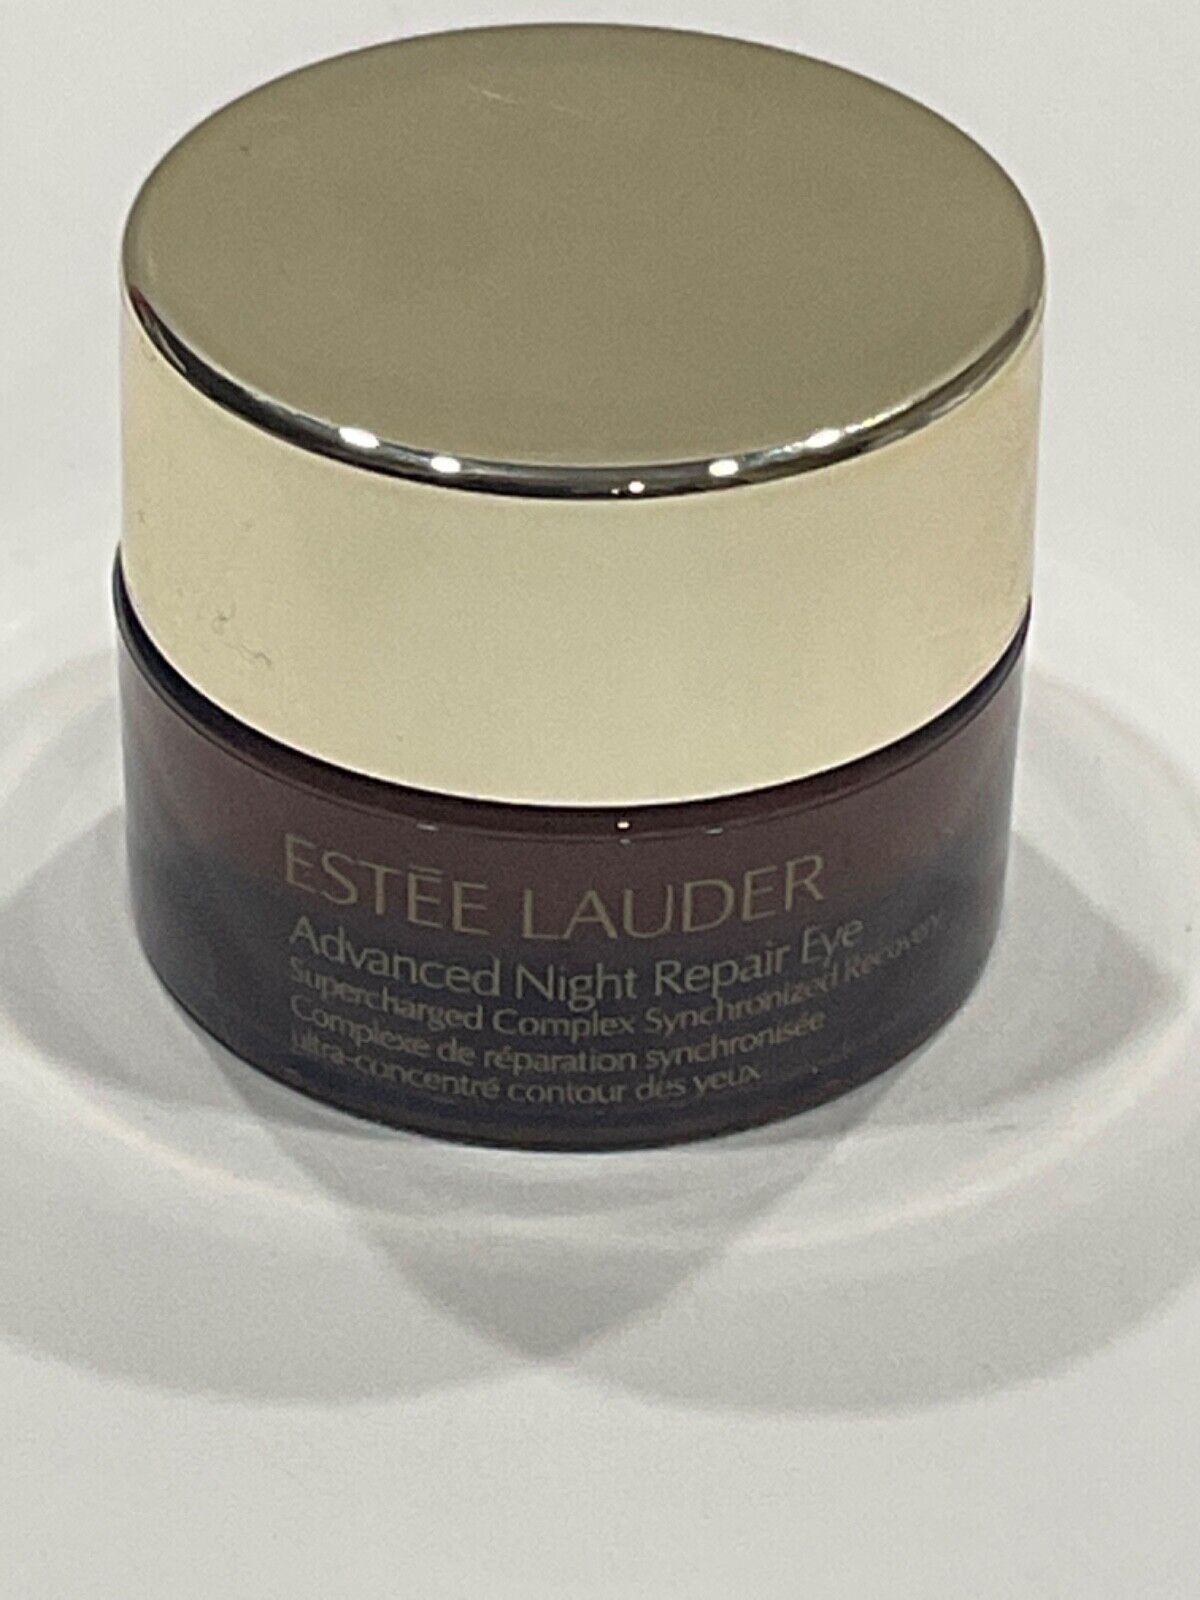 Estee Lauder Advanced Night Repair Eye Supercharged Complex Recovery .17oz/ 5 ml - $8.49